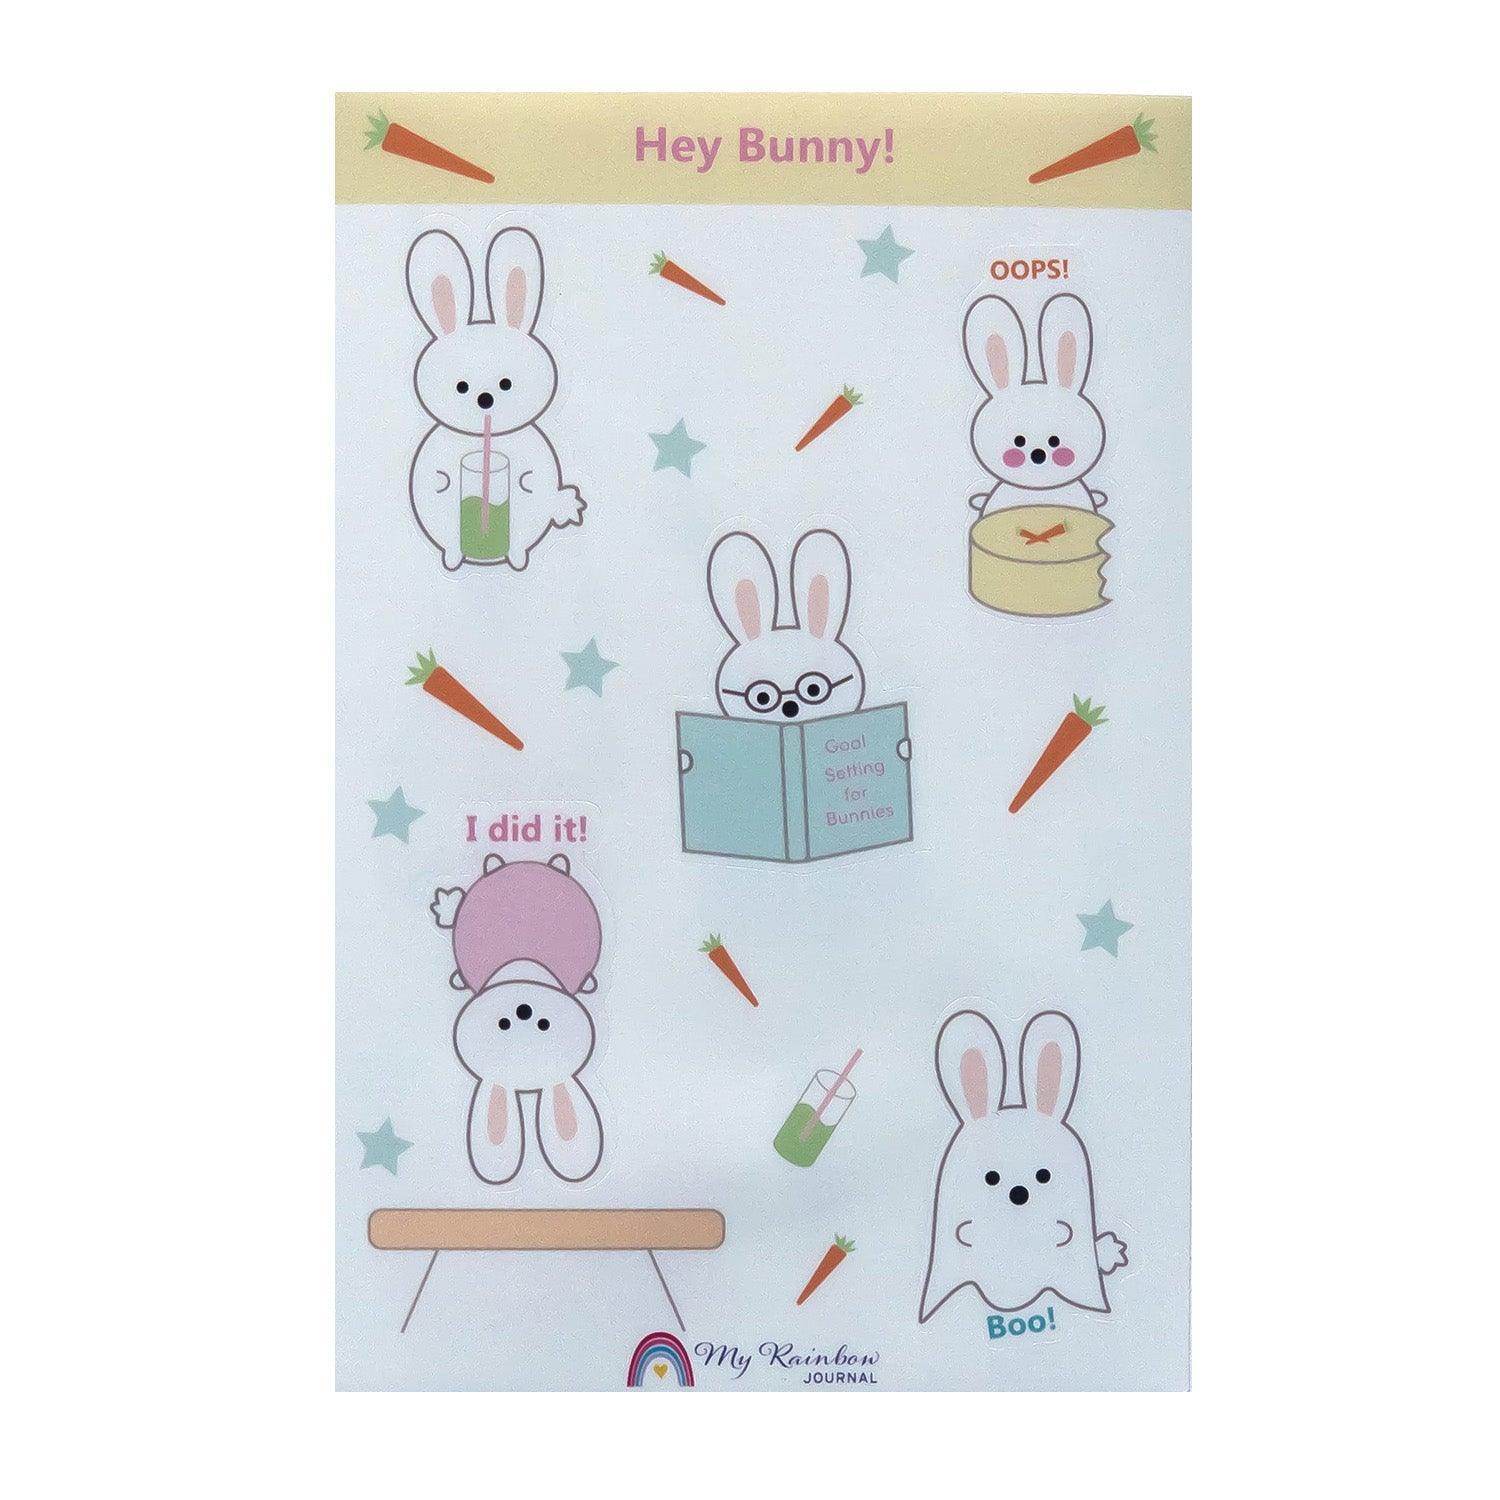 Hey Bunny! Sticker Sheet features a cute bunny that is always trying her best and likes to have fun. 